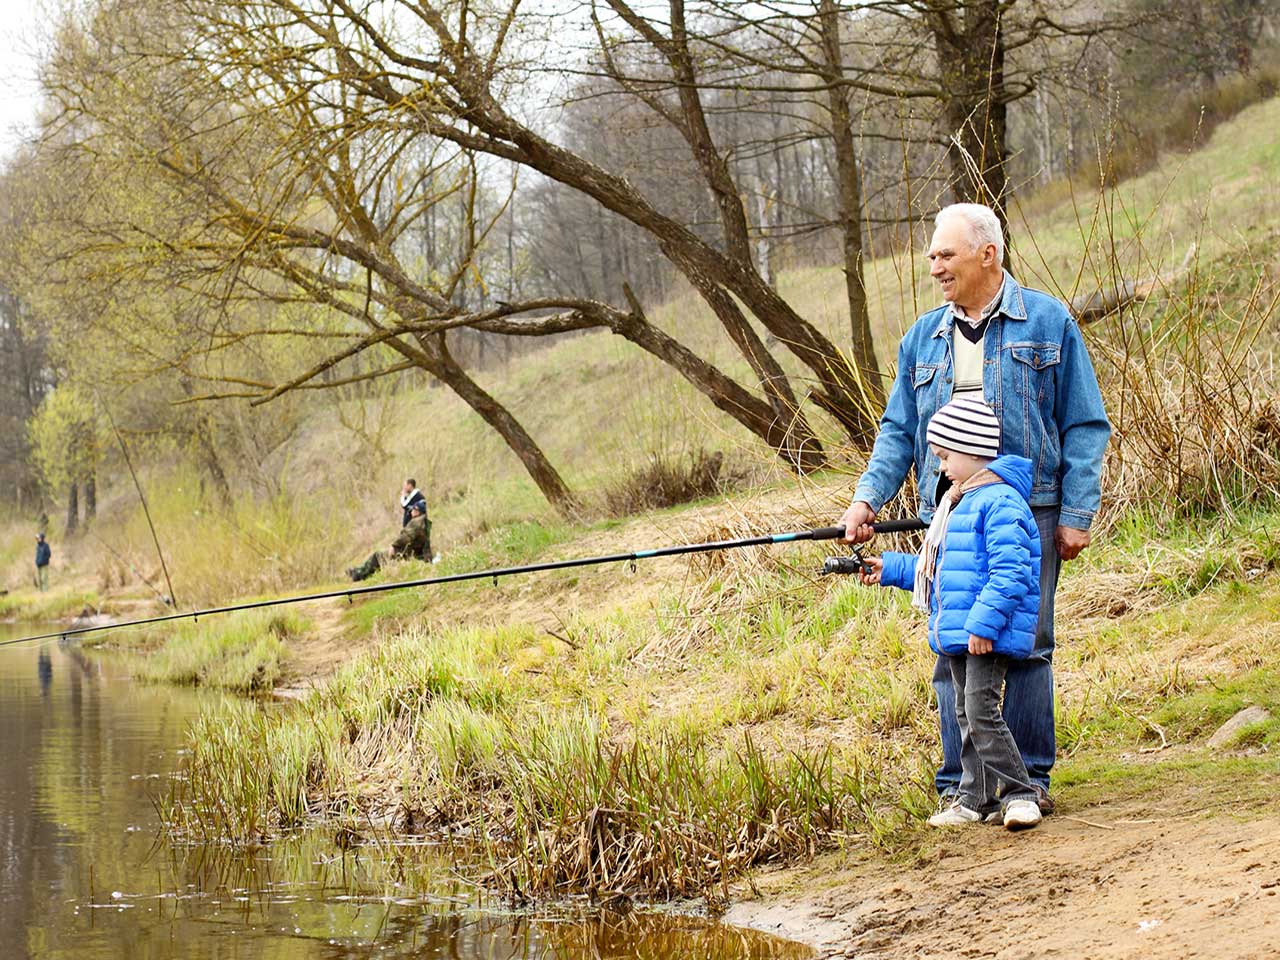 Man fishing with his grandson